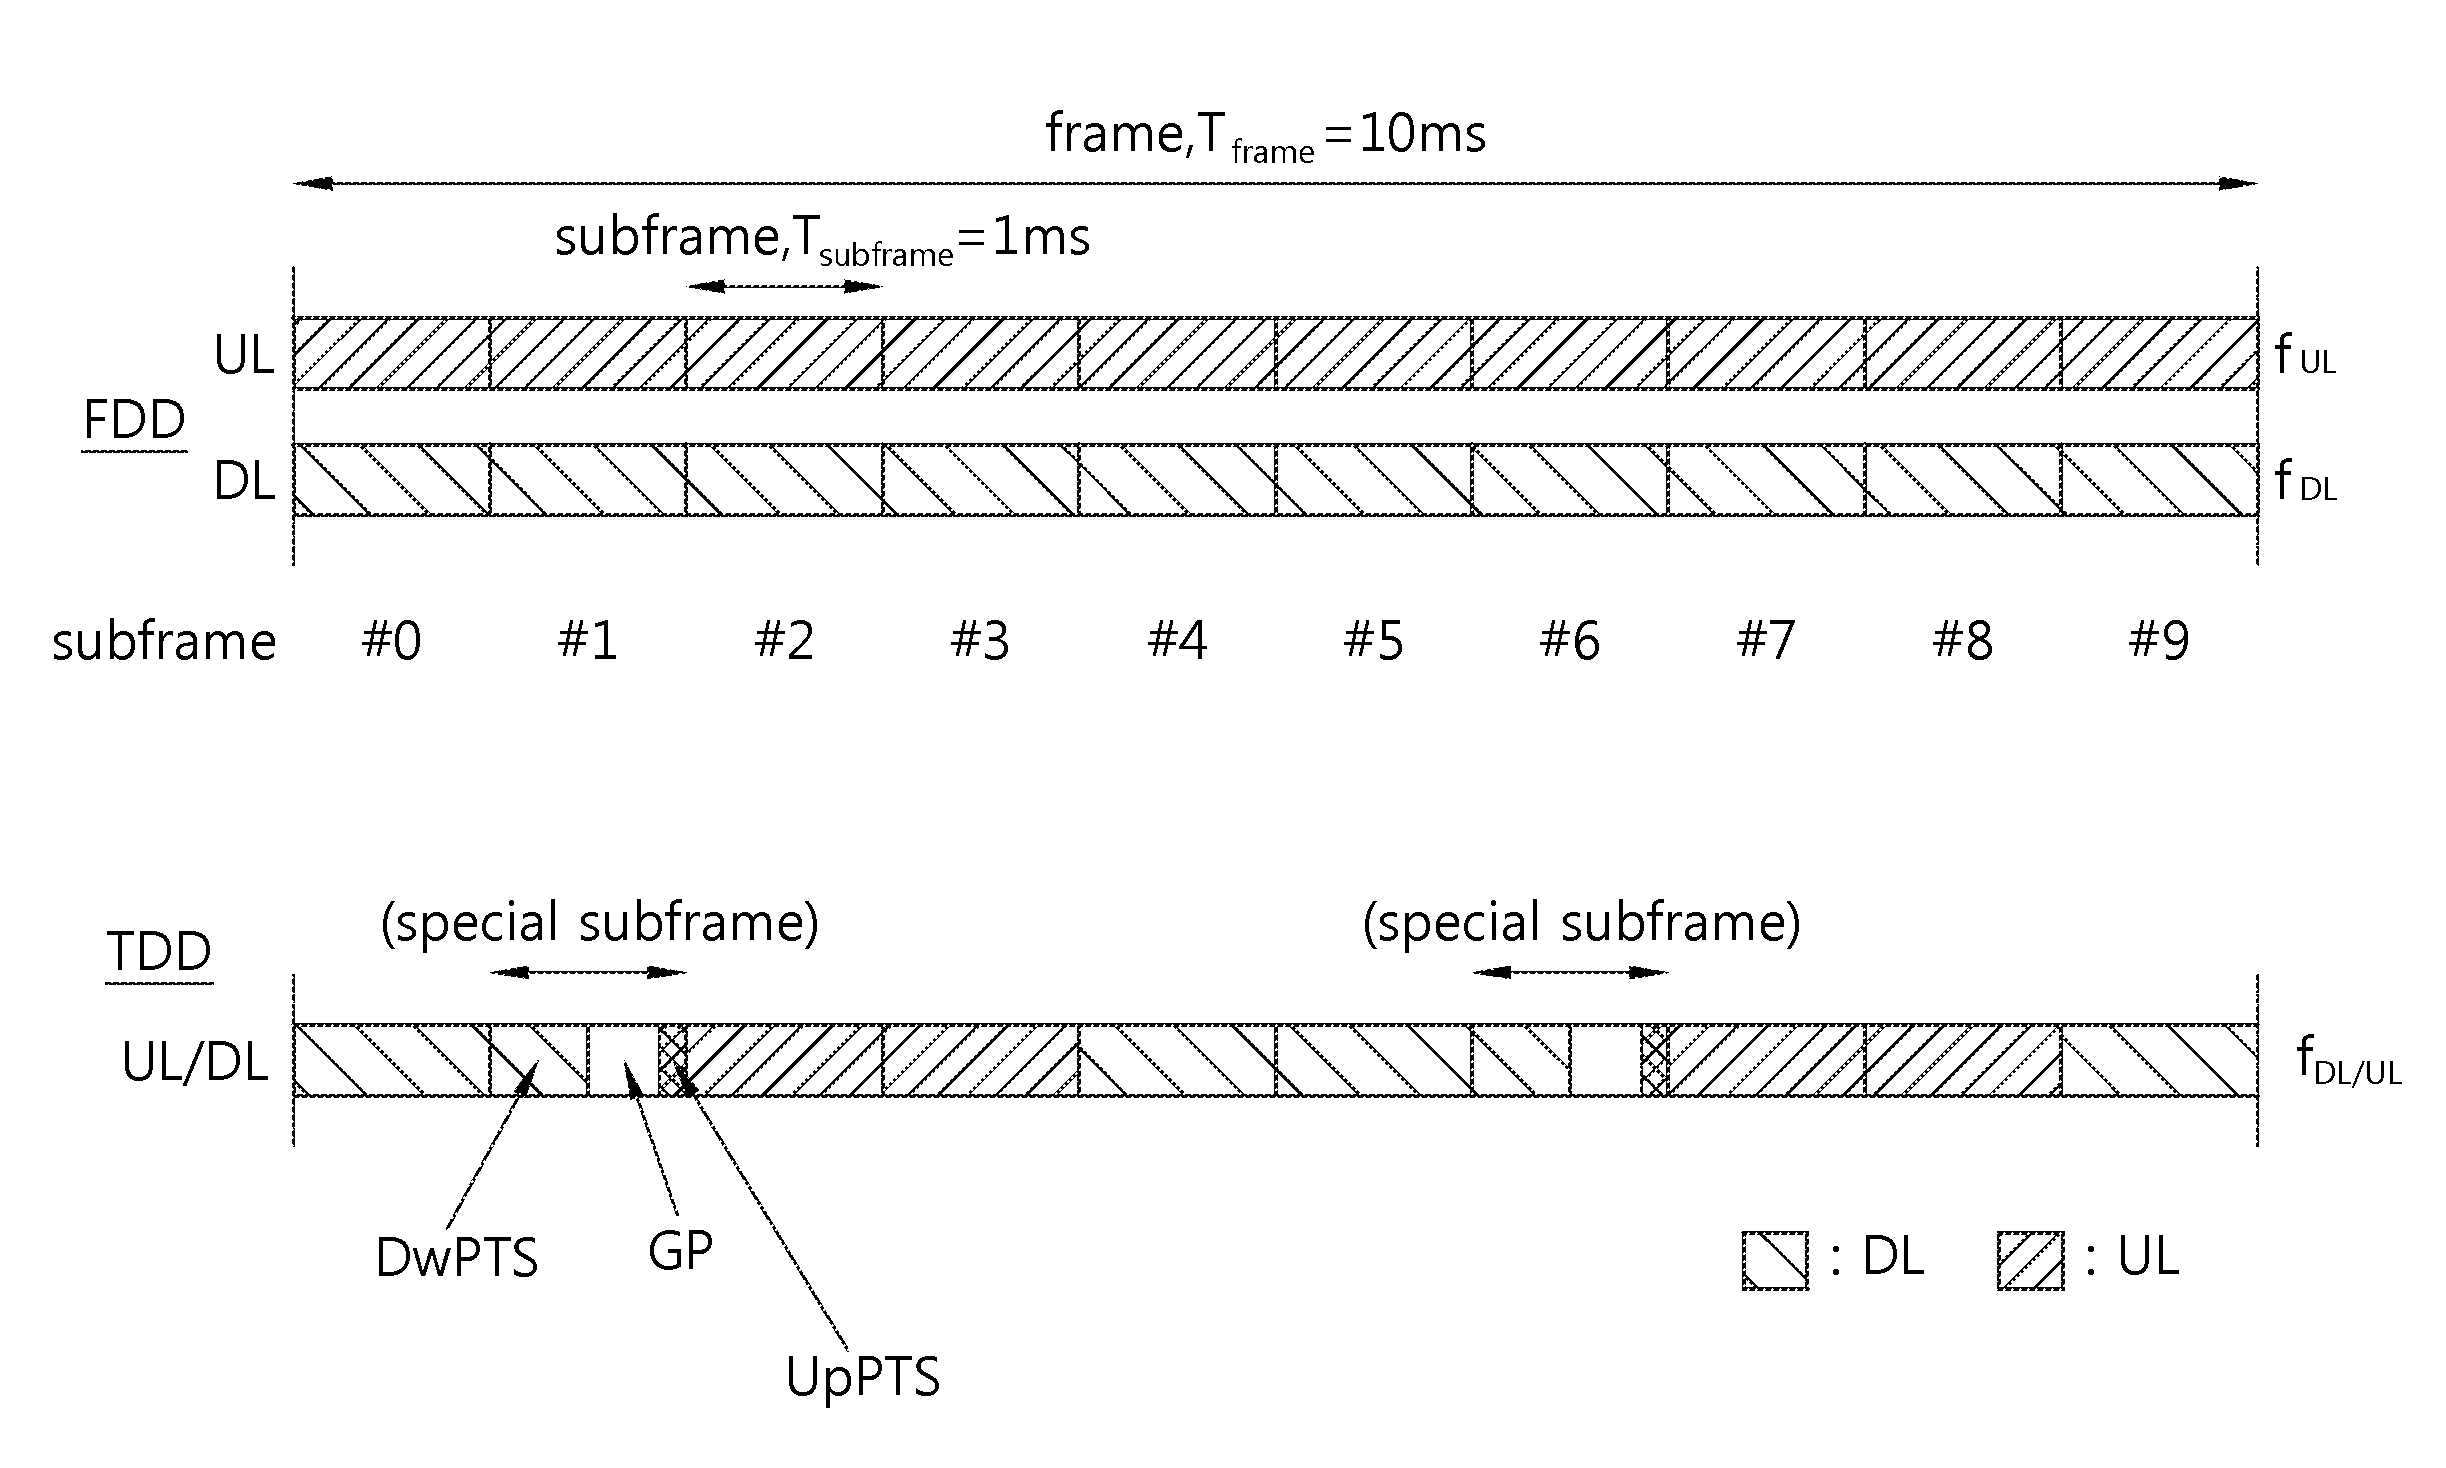 Method and apparatus of uplink scheduling and HARQ timing